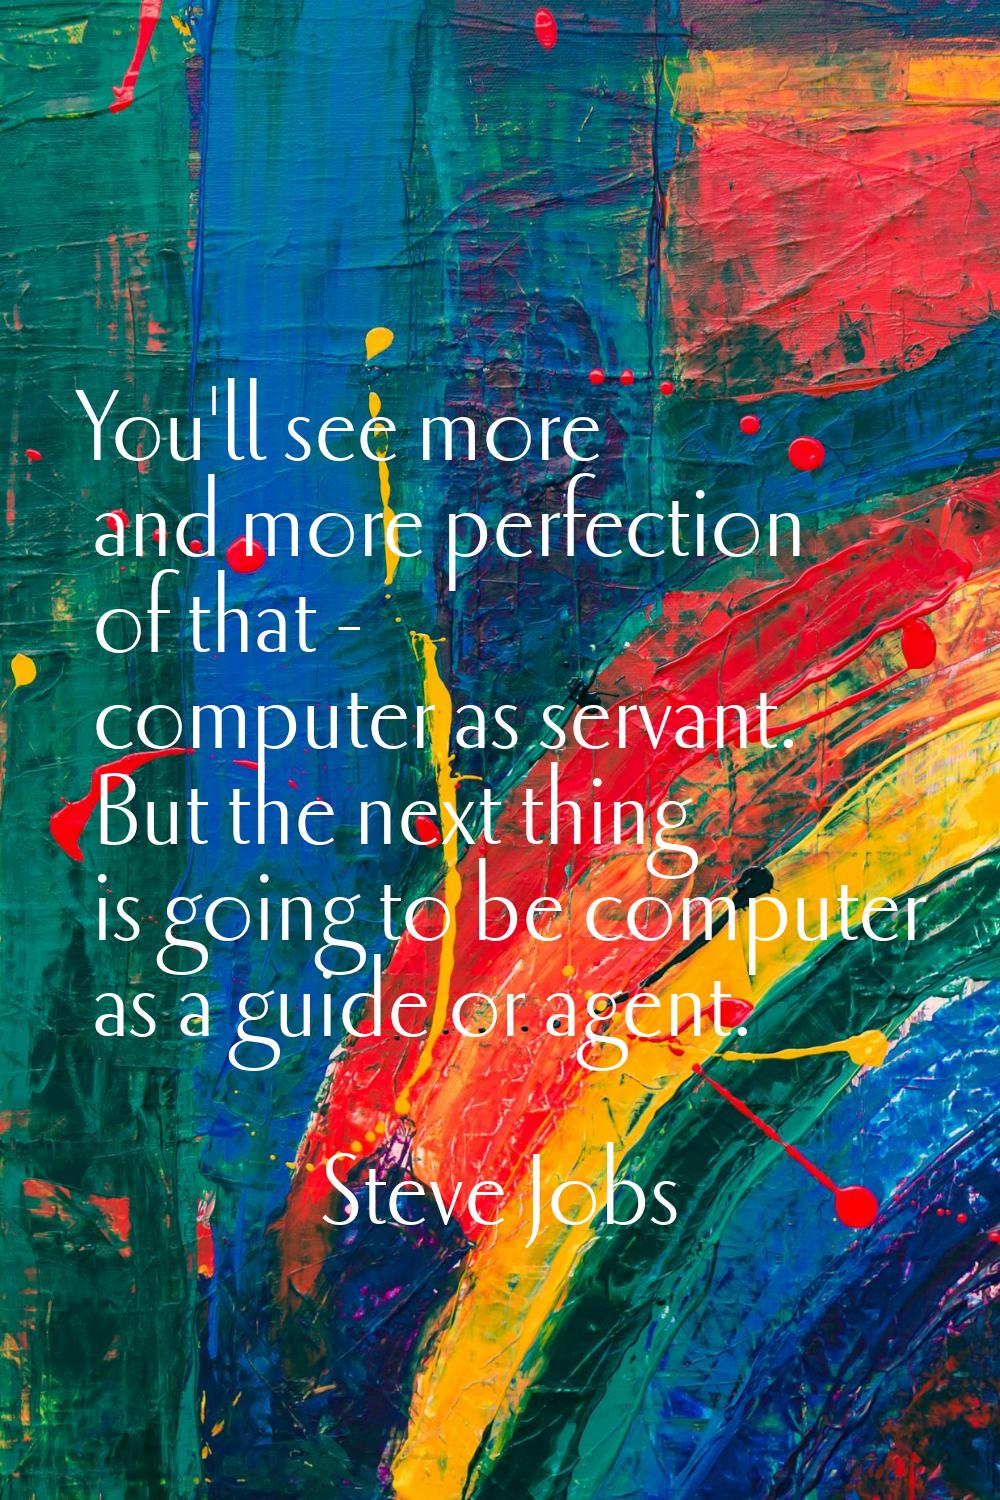 You'll see more and more perfection of that - computer as servant. But the next thing is going to b